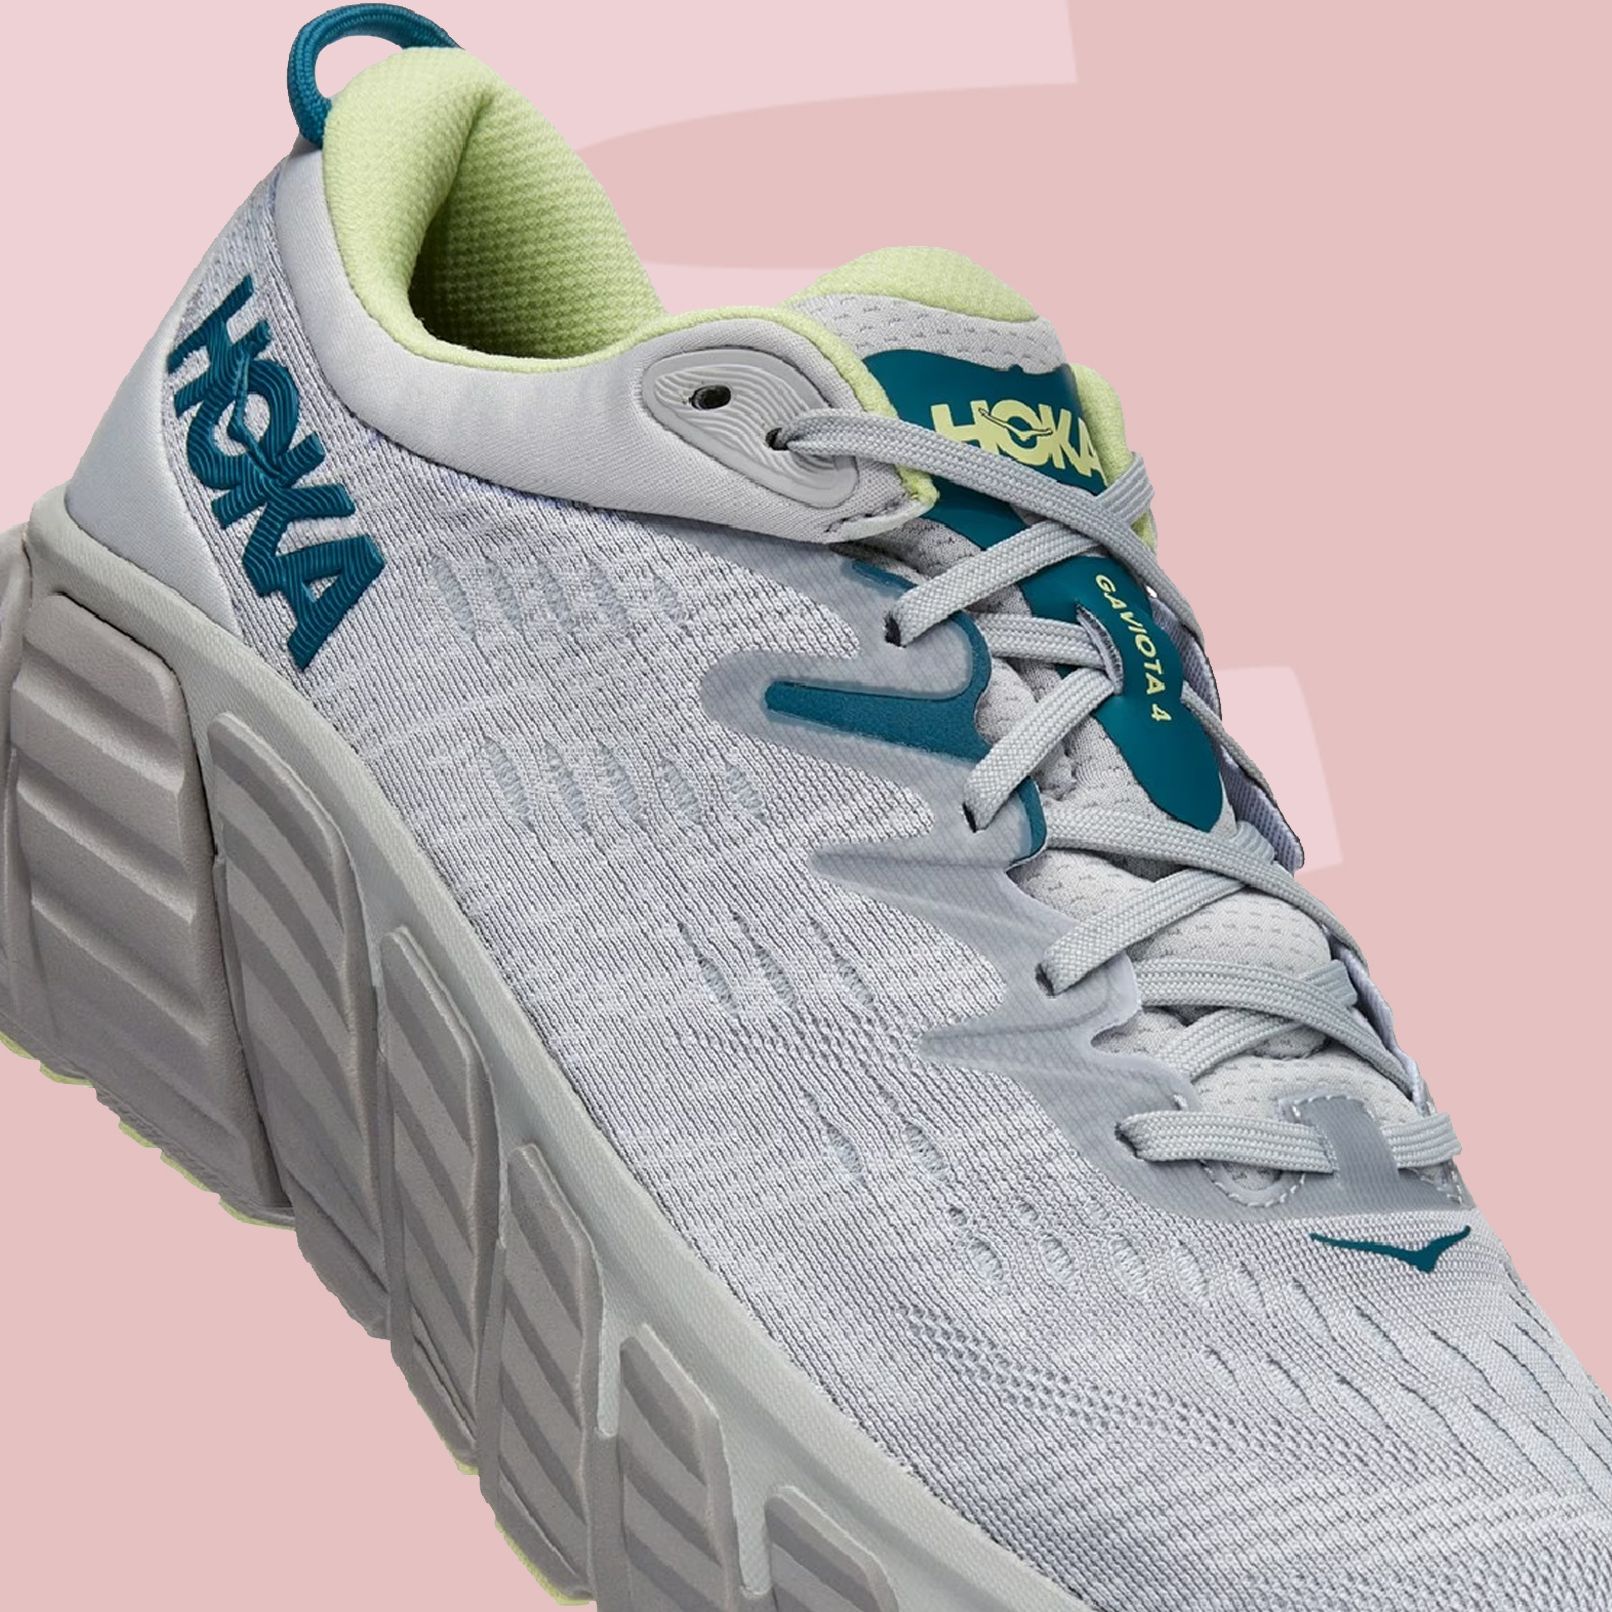 Hoka Has Never Had This Many Sneakers On Sale